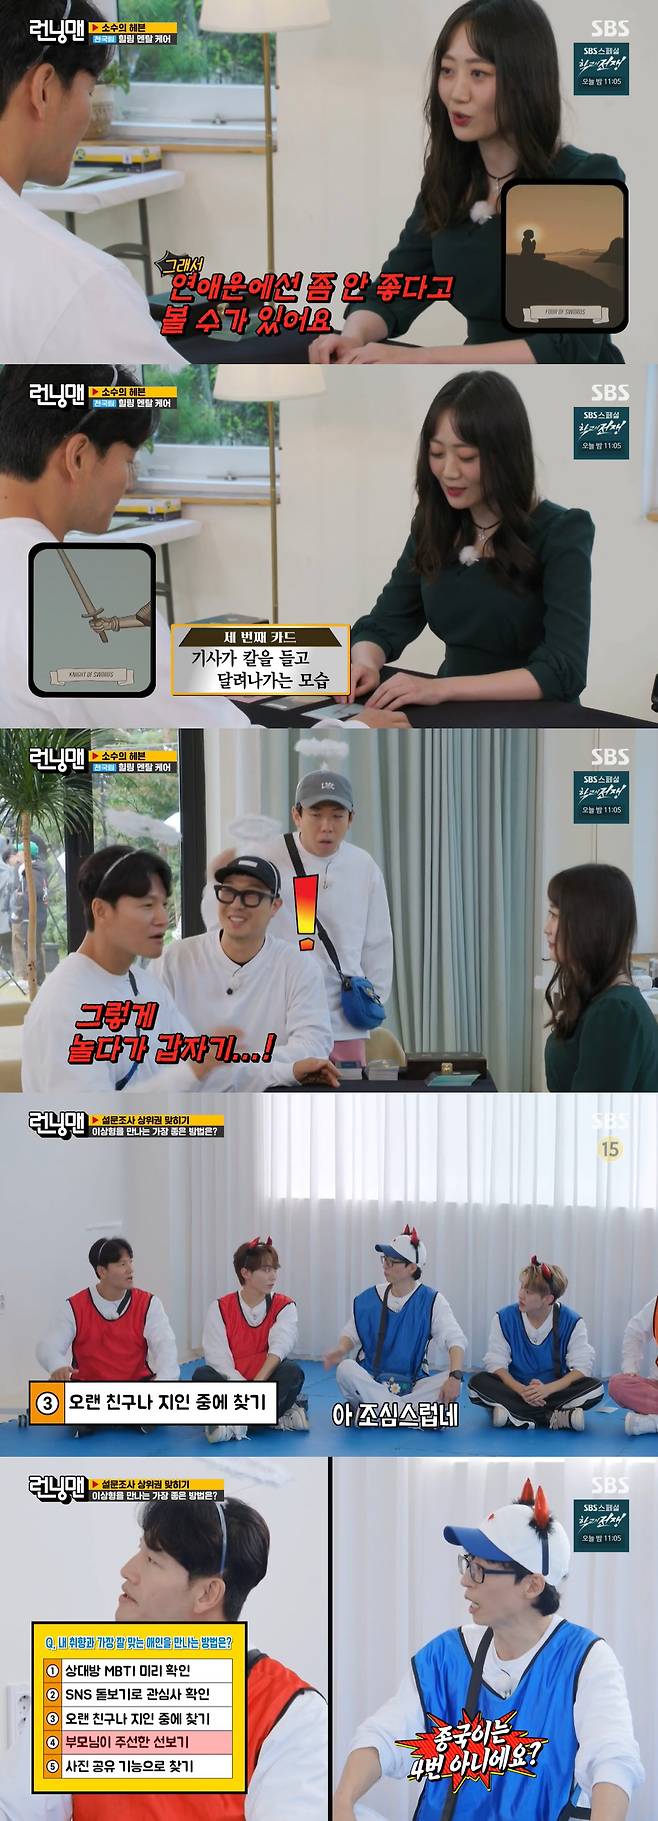 Singer Kim Jong-kook expressed regret after seeing love rhyme.On SBS Running Man broadcast on the 22nd, Seventeen Boo Seungkwan, Hoshi,Referring to the recent wedding of producer Choi Hyeong-in, Yoo Jae-suk said, It was the highlight of the day. One of the courtesy in the wedding hall is to avoid wearing white clothes, noting that Kim Jong-kook wore a folksy guest look at the time.Kim Jong-kook said, Thats a womans story, and Yoo Jae-suk said, A celebration person wears white clothes on top.Song Ji-hyo also said, But when I was celebrating, I had to loosen my head too much. Kim Jong-kook explained, I did not loosen my clothes, but I locked it up there.It was not enough to wear a white costume, and when the situation was delivered again until the exposure, the sighs flowed out and laughed.Kim Jong-kook decided to look at Taros time, love rhyme, and Kim Jong-kook said, I do not have anyone in mind, so I want to know if there is anyone around.Marriage is something I have to worry about, he said.Tarot saw the first card and said, It means that love rhyme has not been good so far. Haha said, My brother was a lot of snowballs.Tarot looked at the card Kim Jong-kook pulled out and said, It is a card that is taking a rest and meditating. Love rhyme is a little bad. It seems to be resting for a while.When I look at the last card, I think that love rhyme will be released after resting. It seems to be going fast, so I can have a woman I like at first sight. Haha cheered Kim Jong-kook, saying, I did not even get married in four months.Tarot saw Kim Jong-kooks last card and said, It is a card that does not work well even if you try hard. Even if you have something in a year, it may be a passing relationship.Kim Jong-kook, who had hoped for romance, soon showed a bitter smile and bitterness.